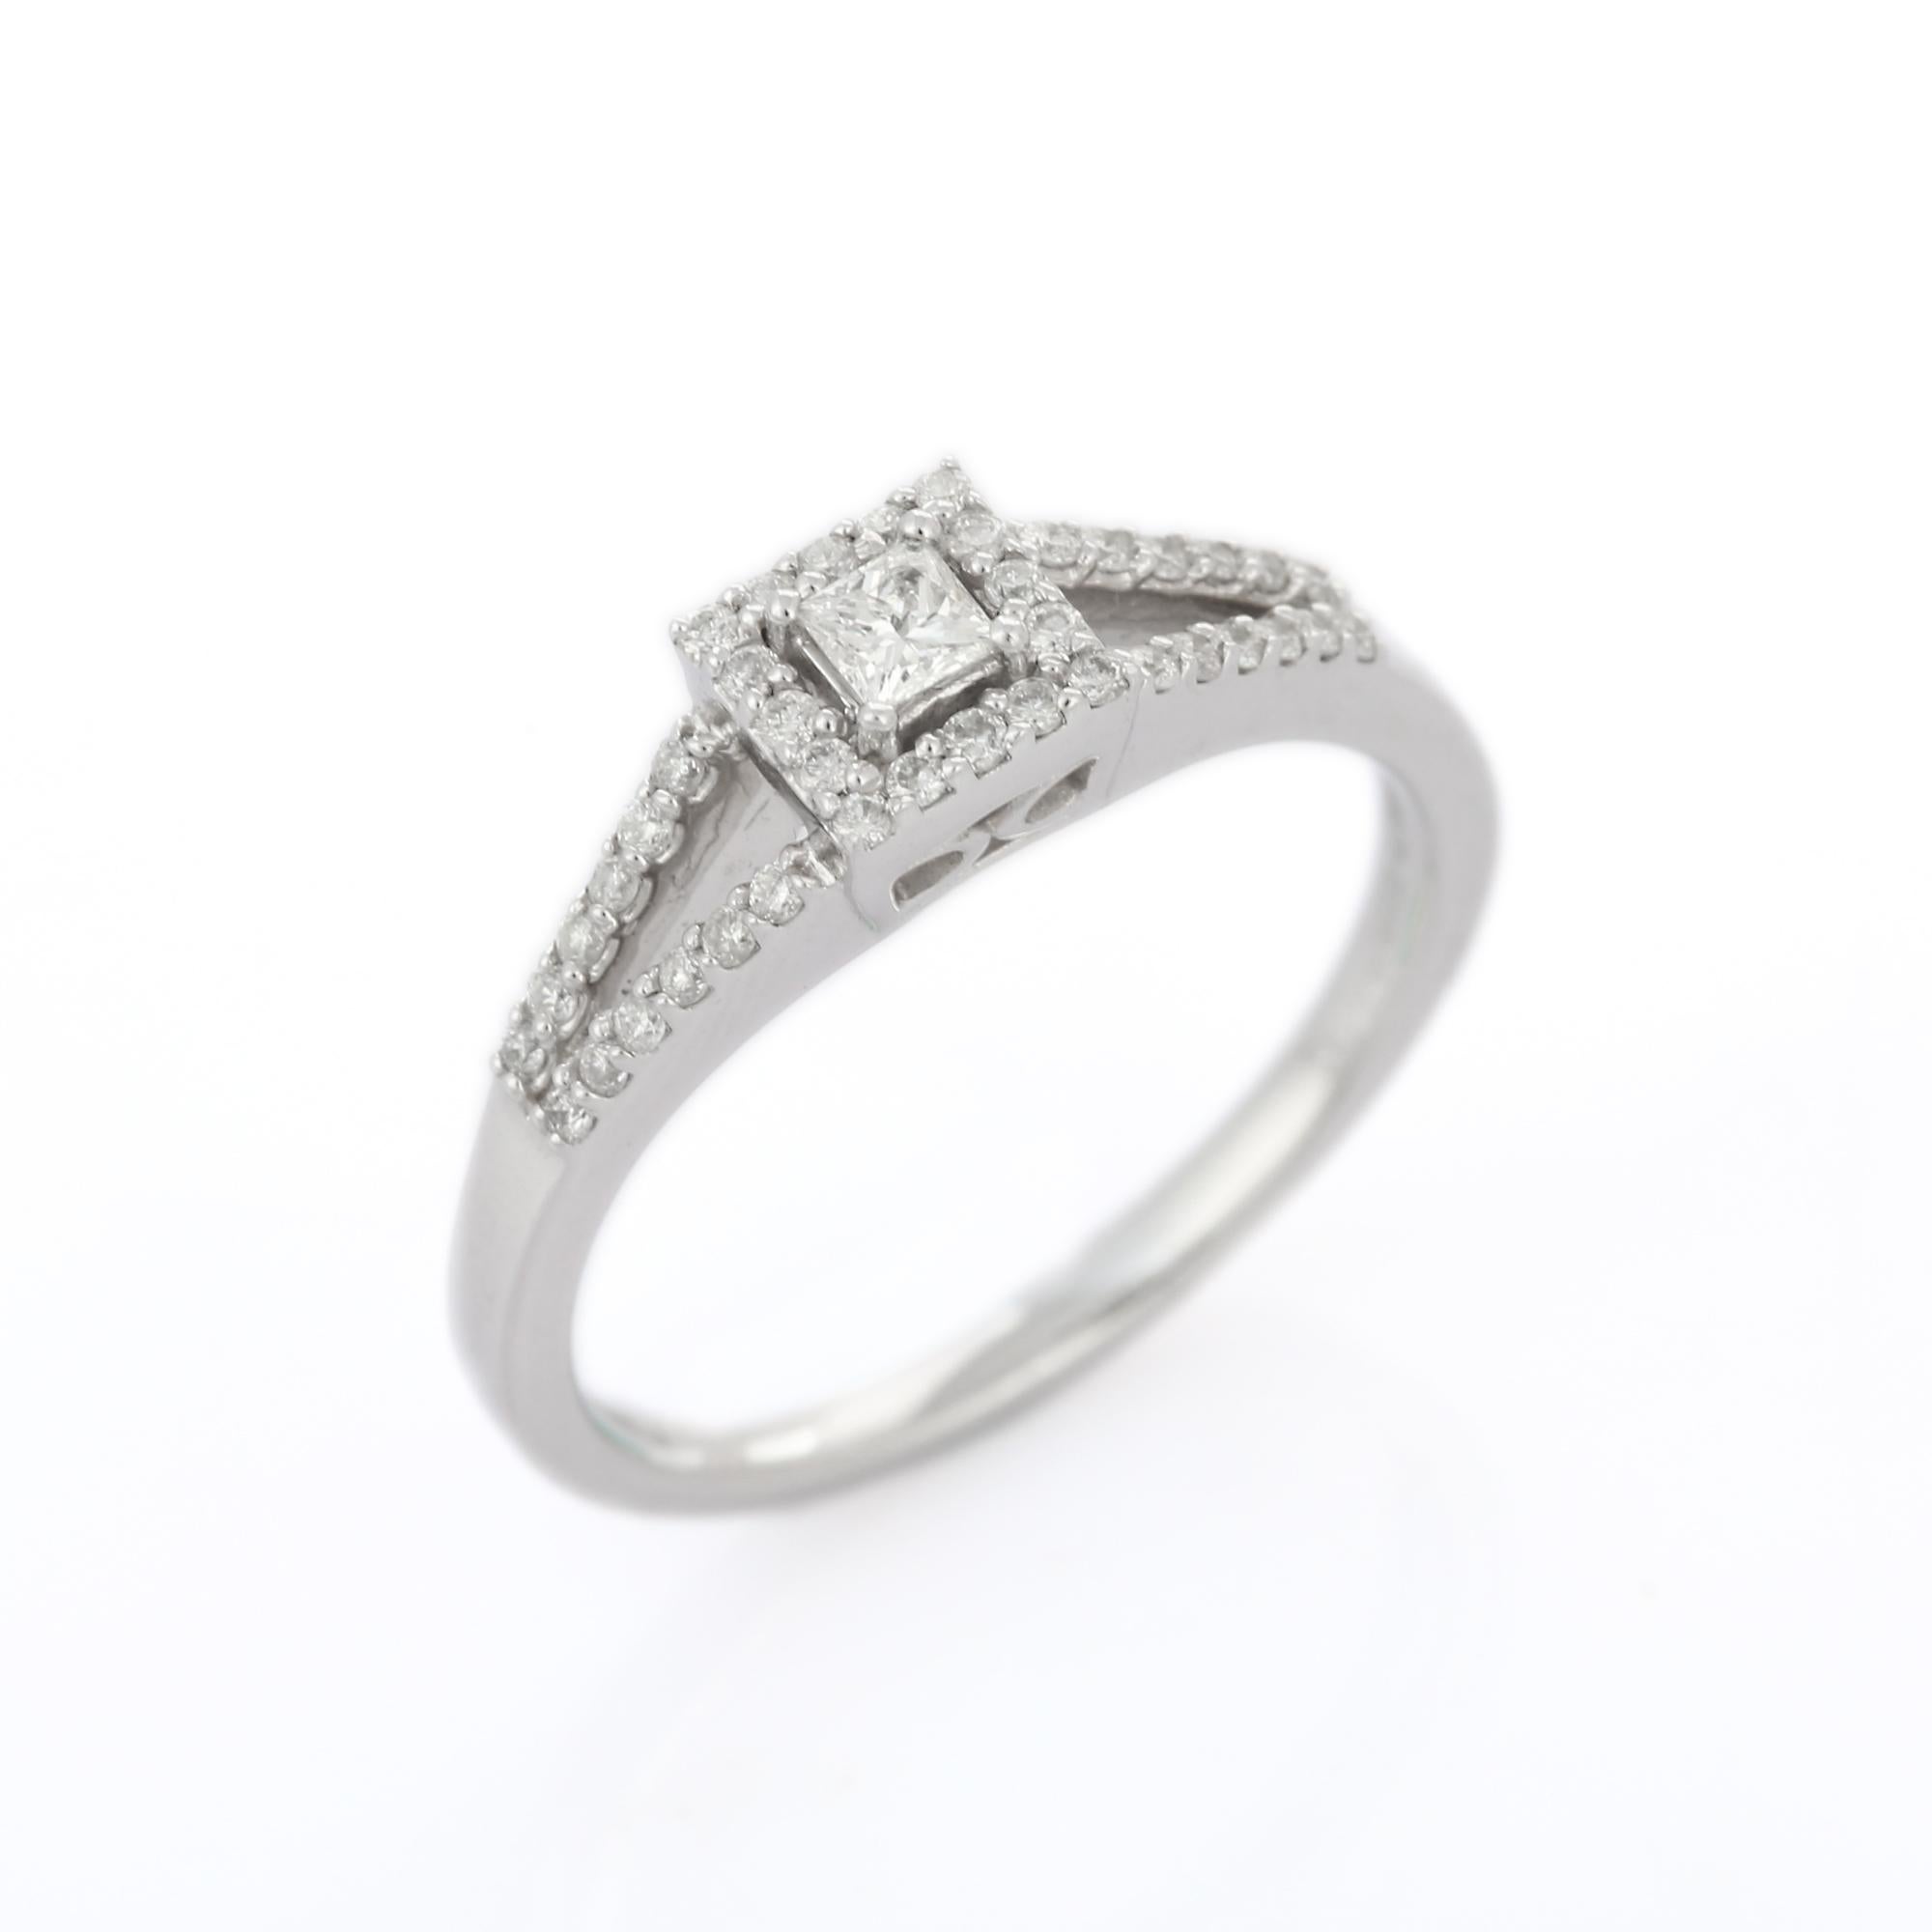 For Sale:  18K White Gold Certified Diamond Engagement Ring 10